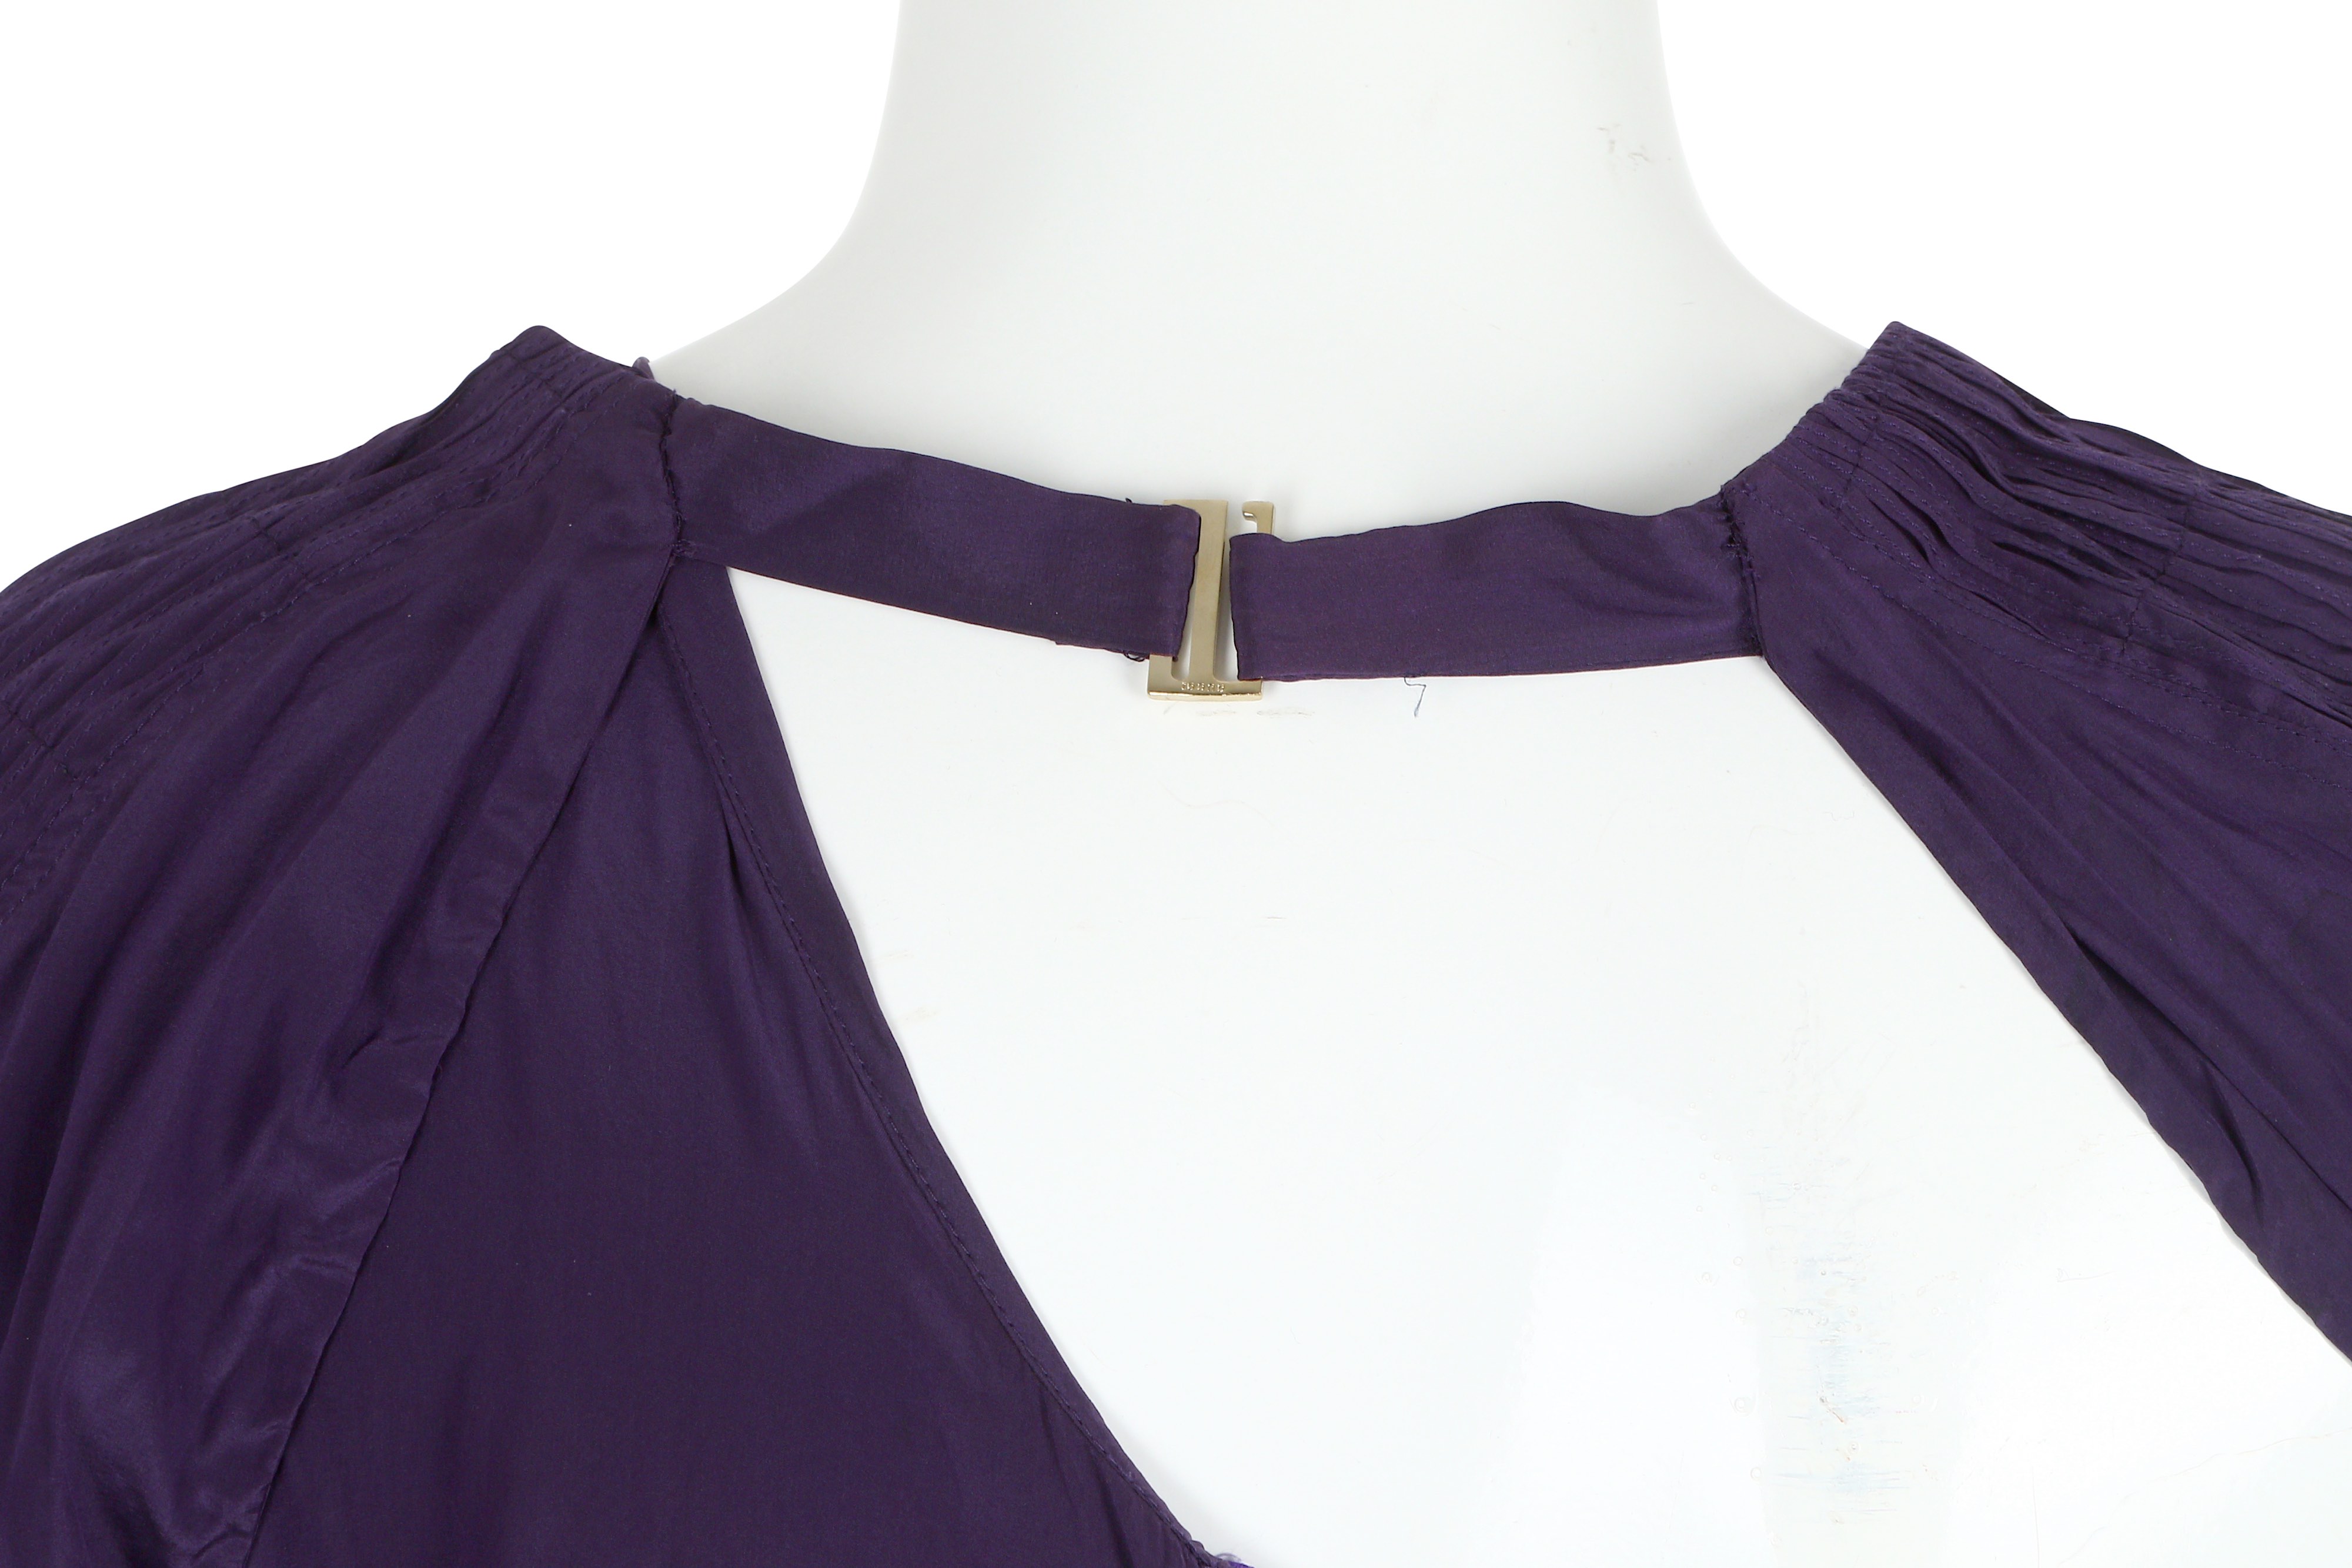 Tom Ford for Gucci Purple Silk Dress - size 40 - Image 6 of 7